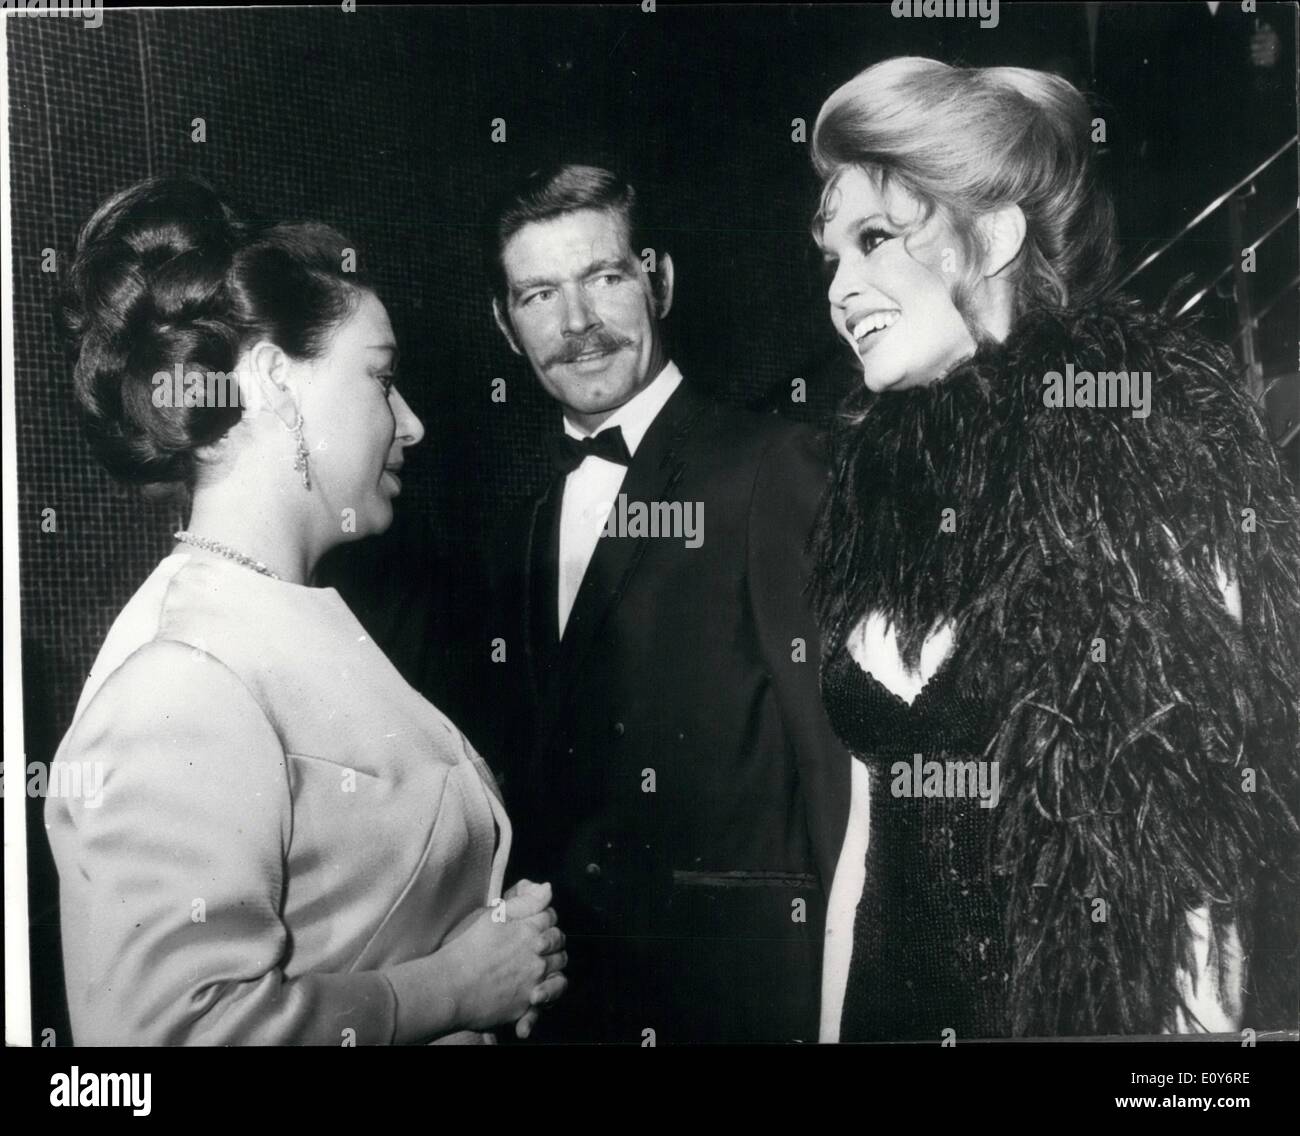 Dec. 12, 1968 - Princess and Brigitte Converse in French. Princess Margaret talking in French with Brigitte Bardot, in center, Stepehn Boyd, ath the Royal charity premiere of the film Shalako at the Leicester Square Theatre, London, last night (Wednesday). Afterwards Brigitte Bardot star of the film, said '' I was surprised when the Princess spoke to me in French''. The Premiere, sponsored by the Variety Club of Great Brrtain, is in aid of the Dockland Settlements, the Jewish National Fund Charitable Trust, and Variety's Heart Fund for under privileged children. Stock Photo